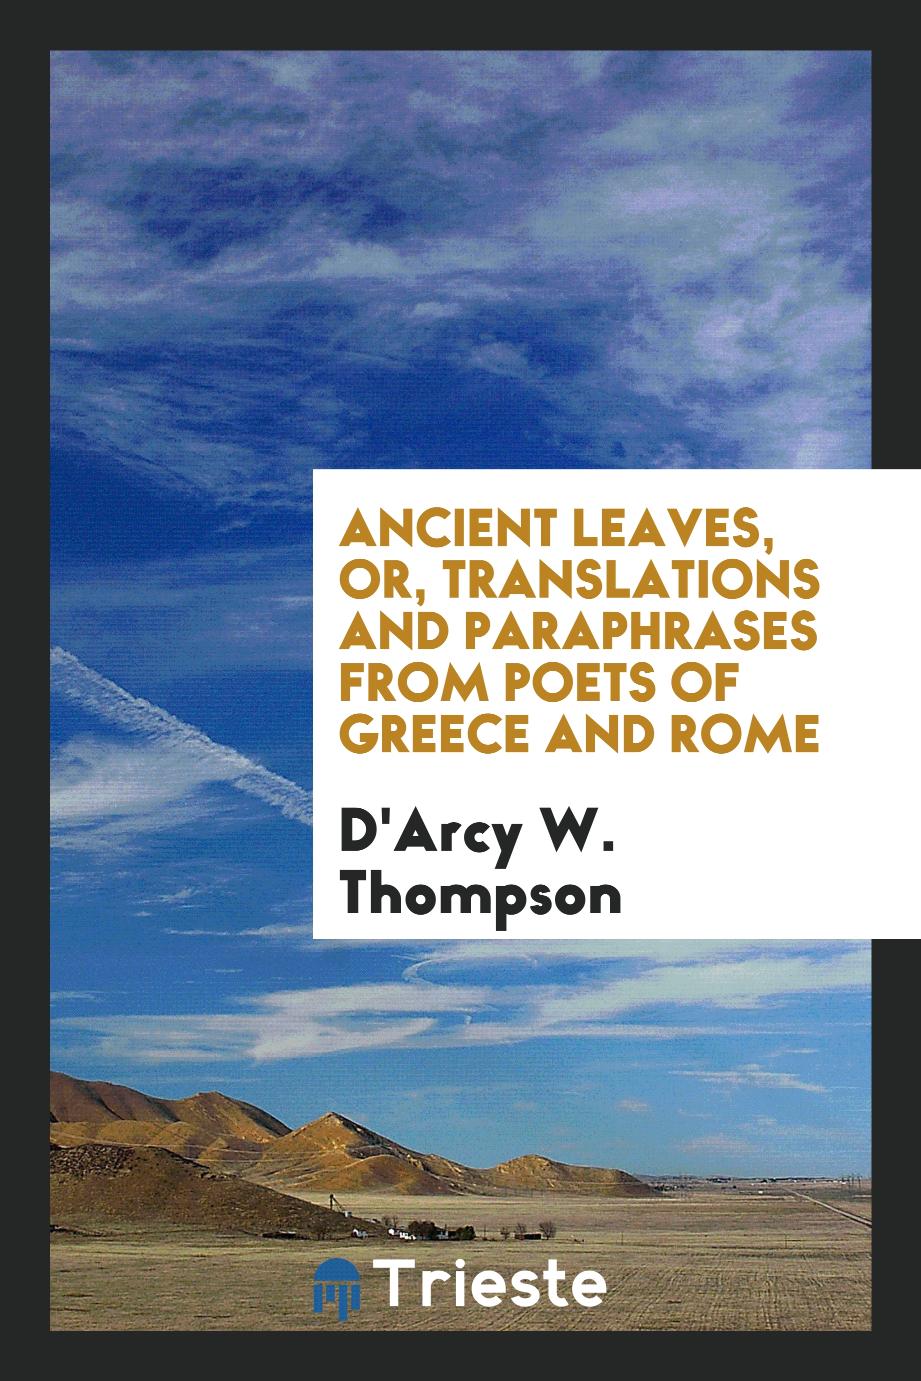 Ancient Leaves, or, Translations and Paraphrases from Poets of Greece and Rome